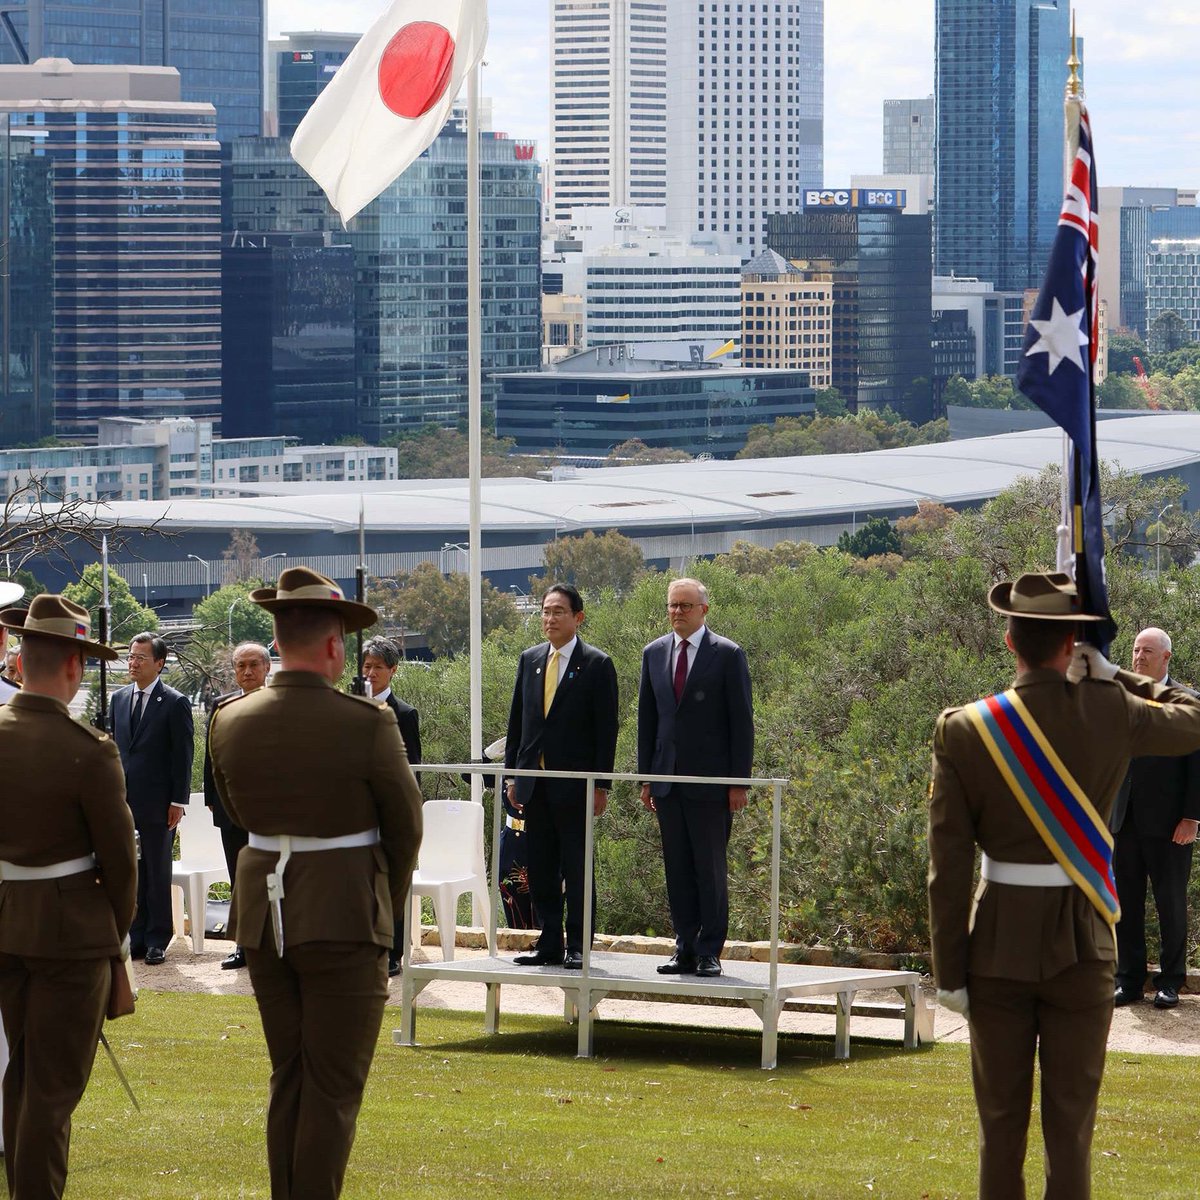 PM Kishida @JPN_PMO has now departed 🇦🇺. After a visit chockers with the best Australia has to offer, we can safely and confidently say that our Special Strategic Partnership is at an all-time high. Hoo-roo and come again soon!